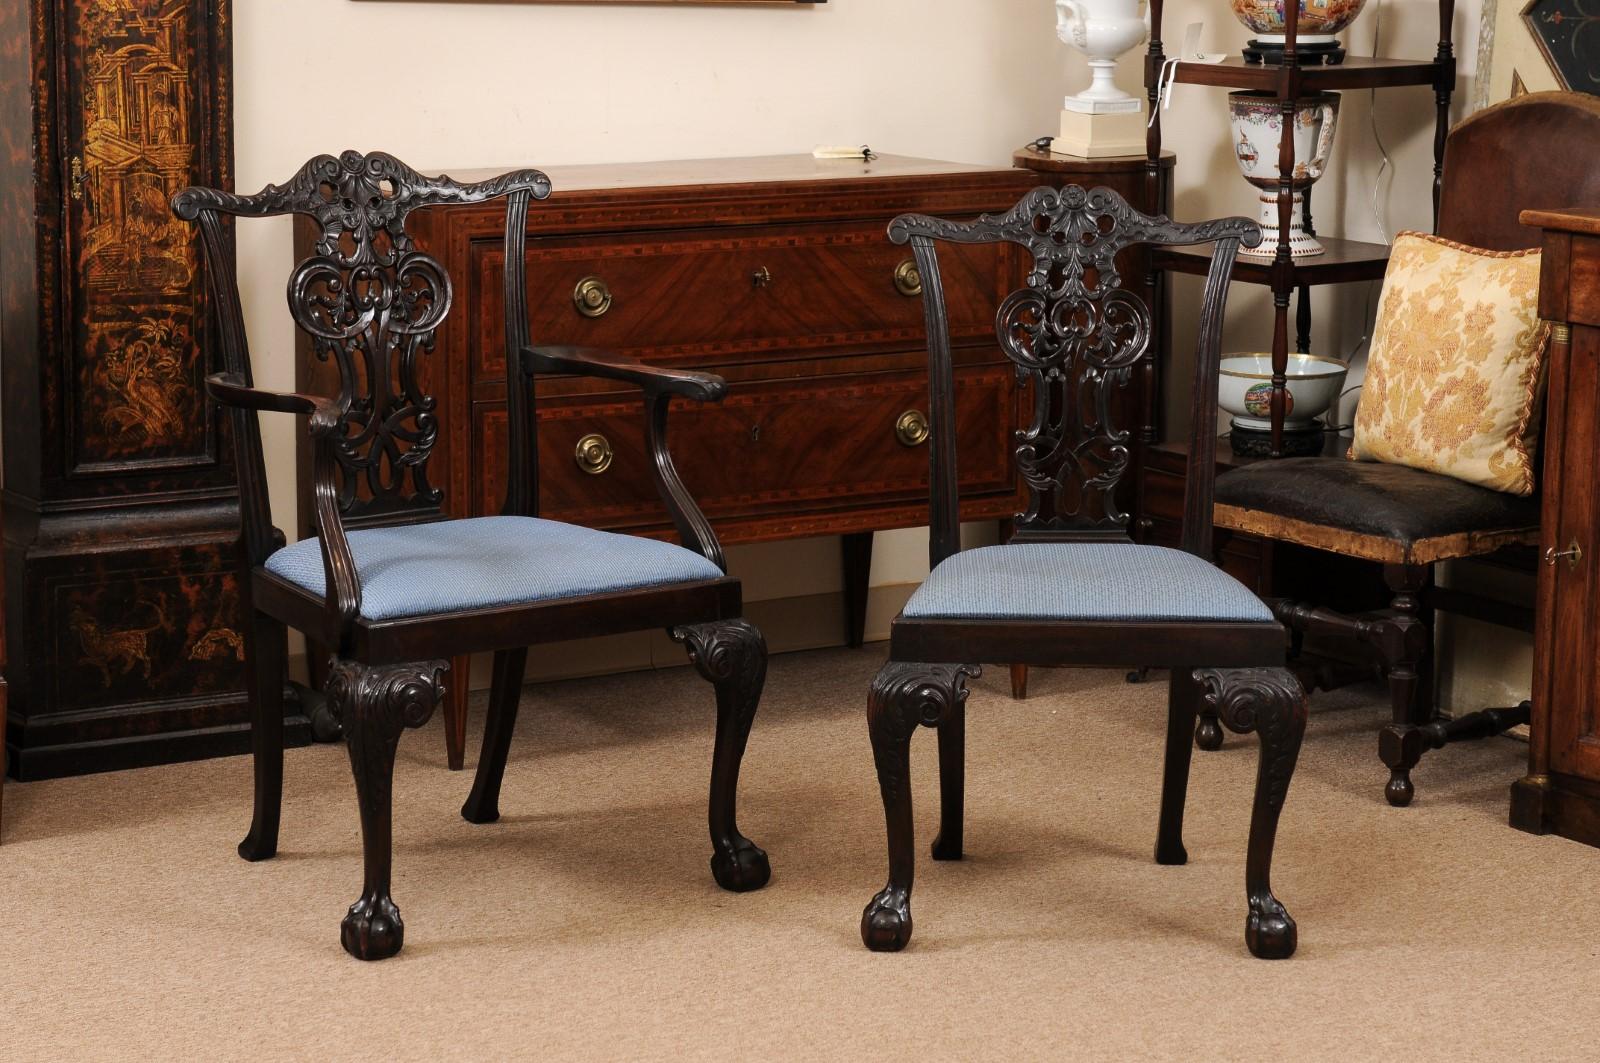 Set of 6 English Chippendale Style Mahogany Dining Chairs with Ball & Claw Feet In Good Condition For Sale In Atlanta, GA